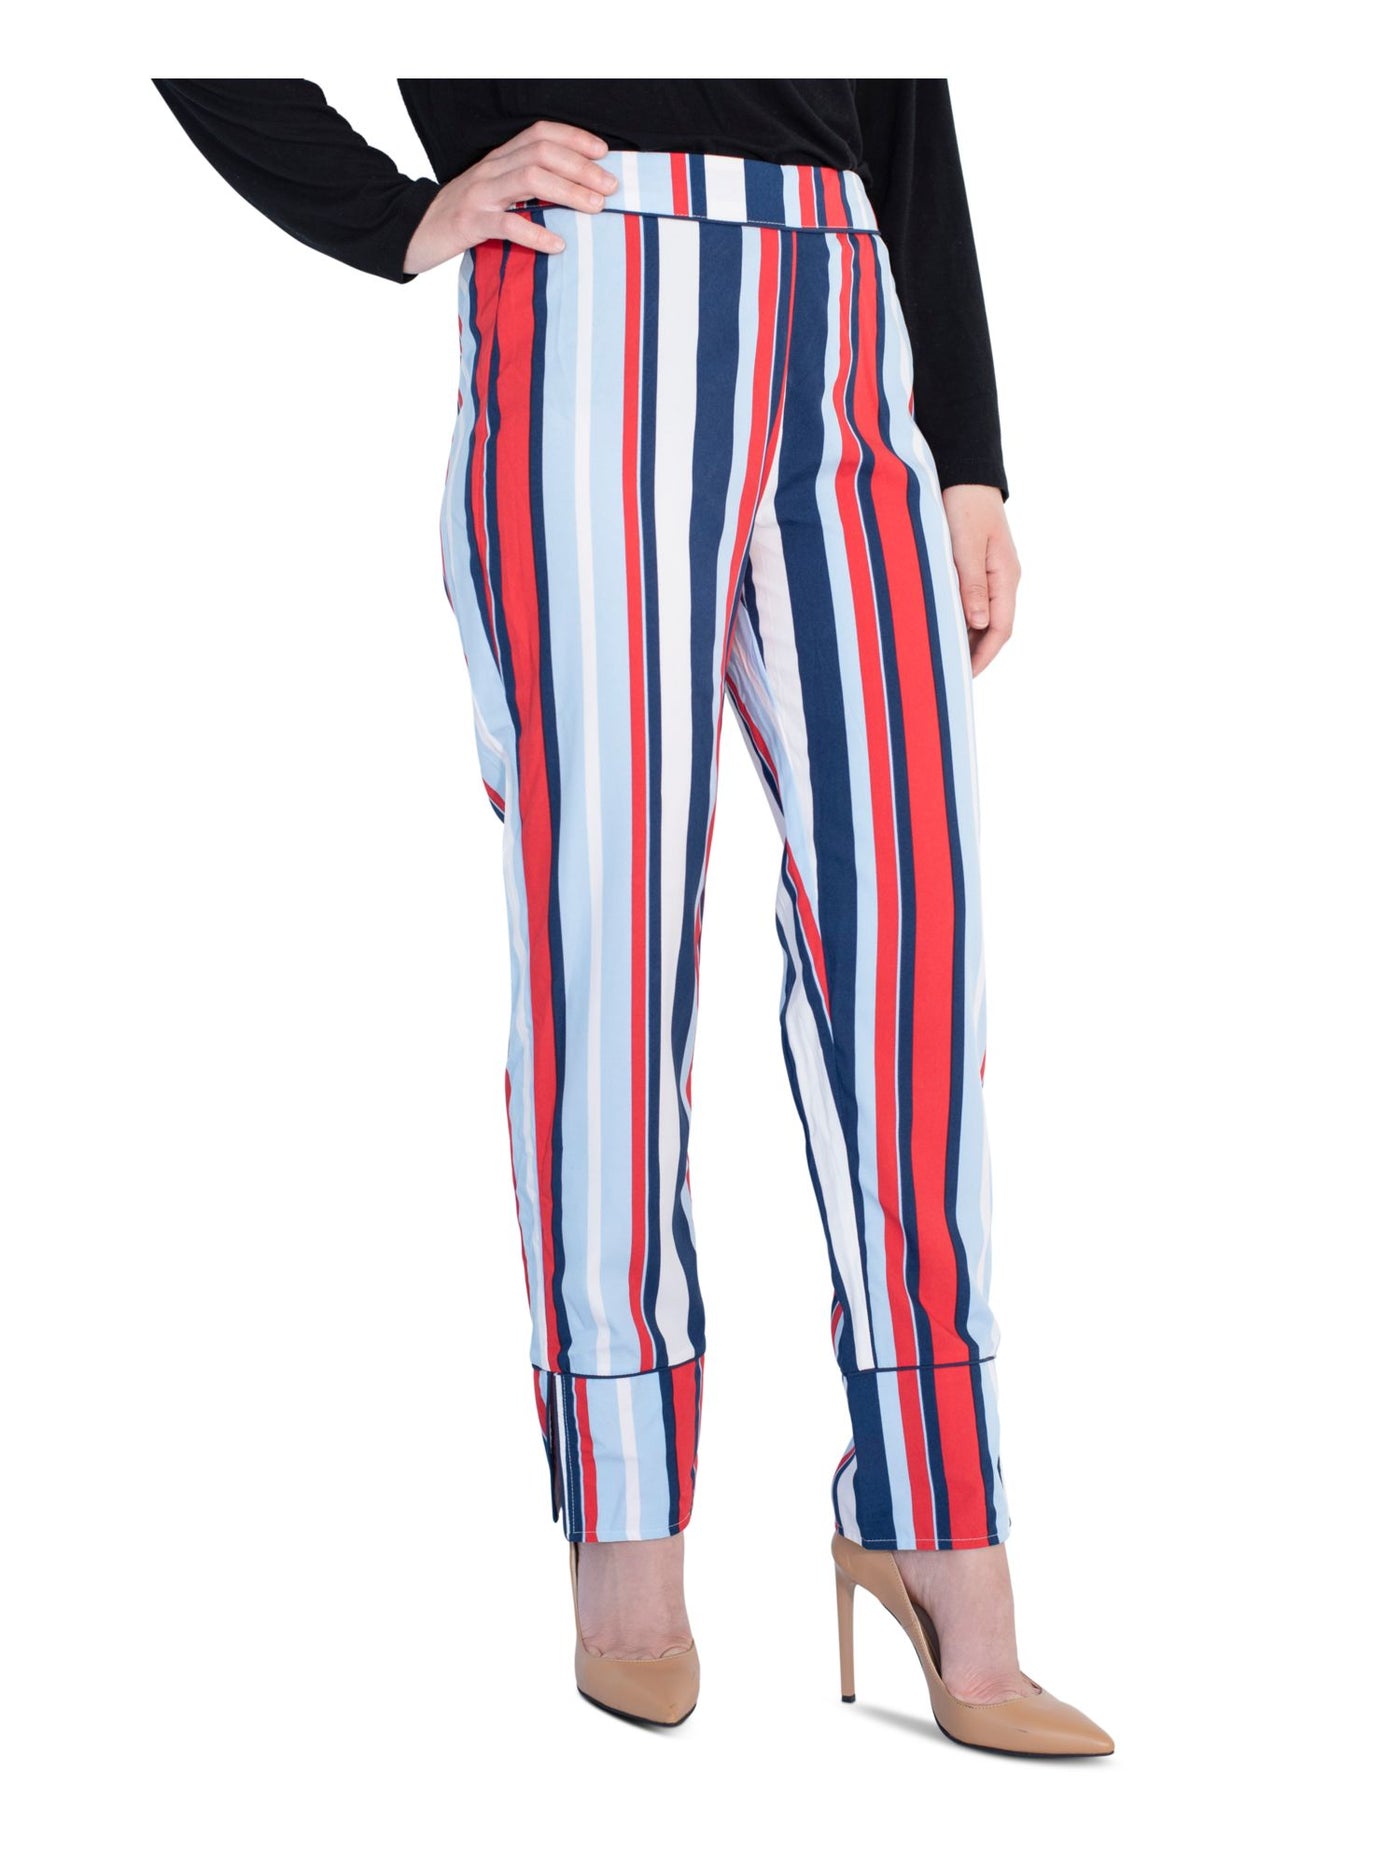 VERONA Womens Red Striped Cocktail Straight leg Pants S